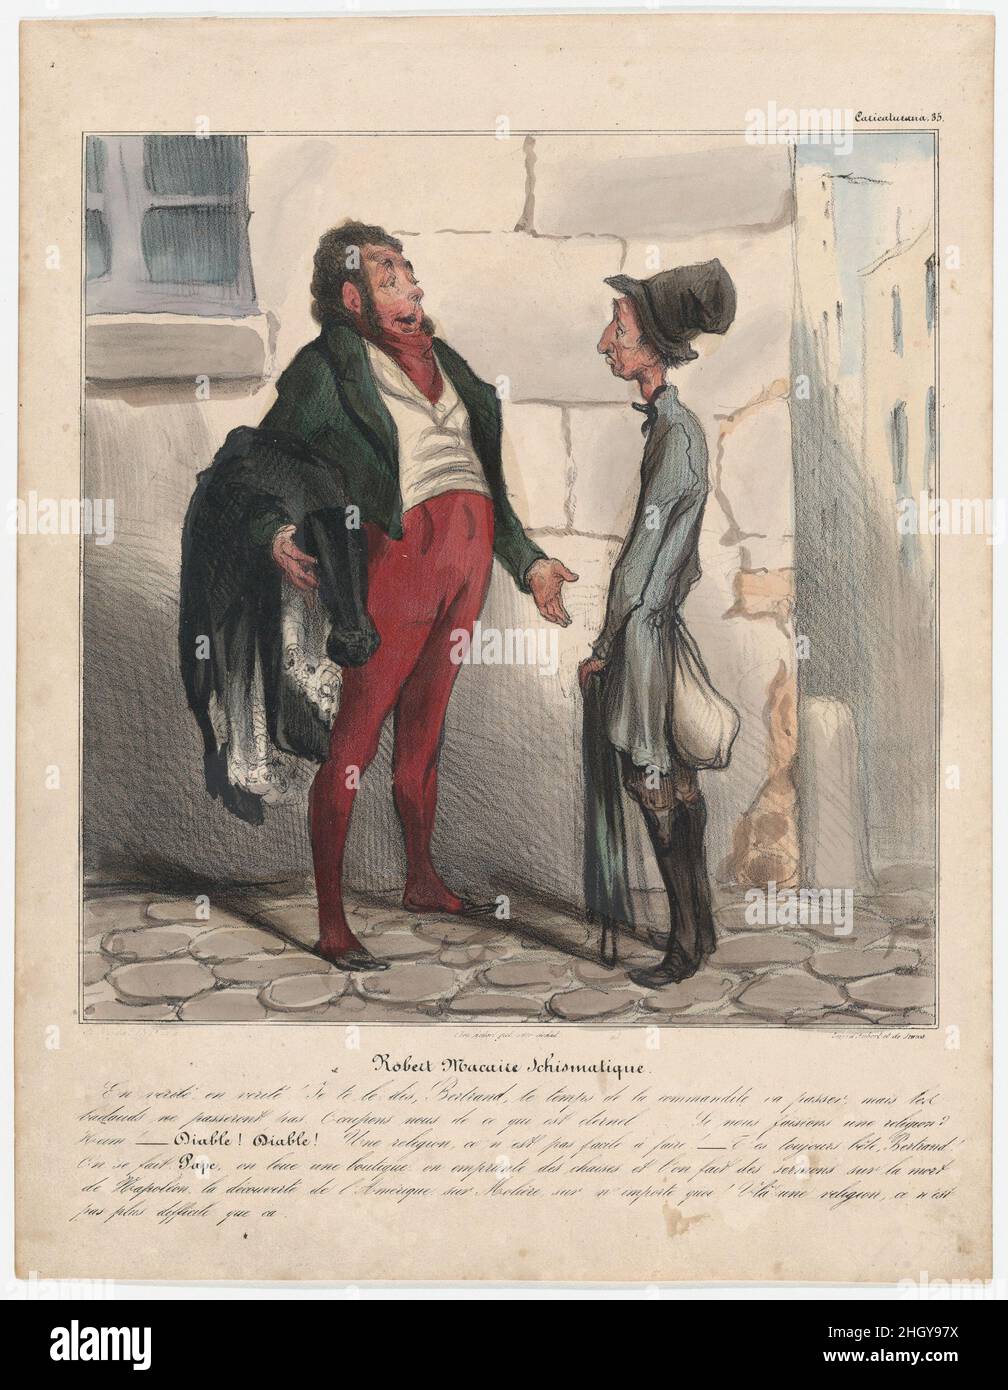 Plate 35: Robert Macaire schismatic, from 'Caricaturana,' published in Les Robert Macaires 1838 Honoré Daumier - True, true, let me tell you, Bertrand, the time of the limited partnership shall pass but the strollers shall never pass. Let us concern ourselves with the eternal... What if we start a religion? Eh! - A religion, by devil, that's not easy to do! - You're always so stupid, Bertrand! I am proclaiming myself Pope, we rent a shop, we borrow some chairs and we write some sermons on the death of Napoleon, on the discovery of America, on Molière, on whatever! That's a religion, it's no mo Stock Photo